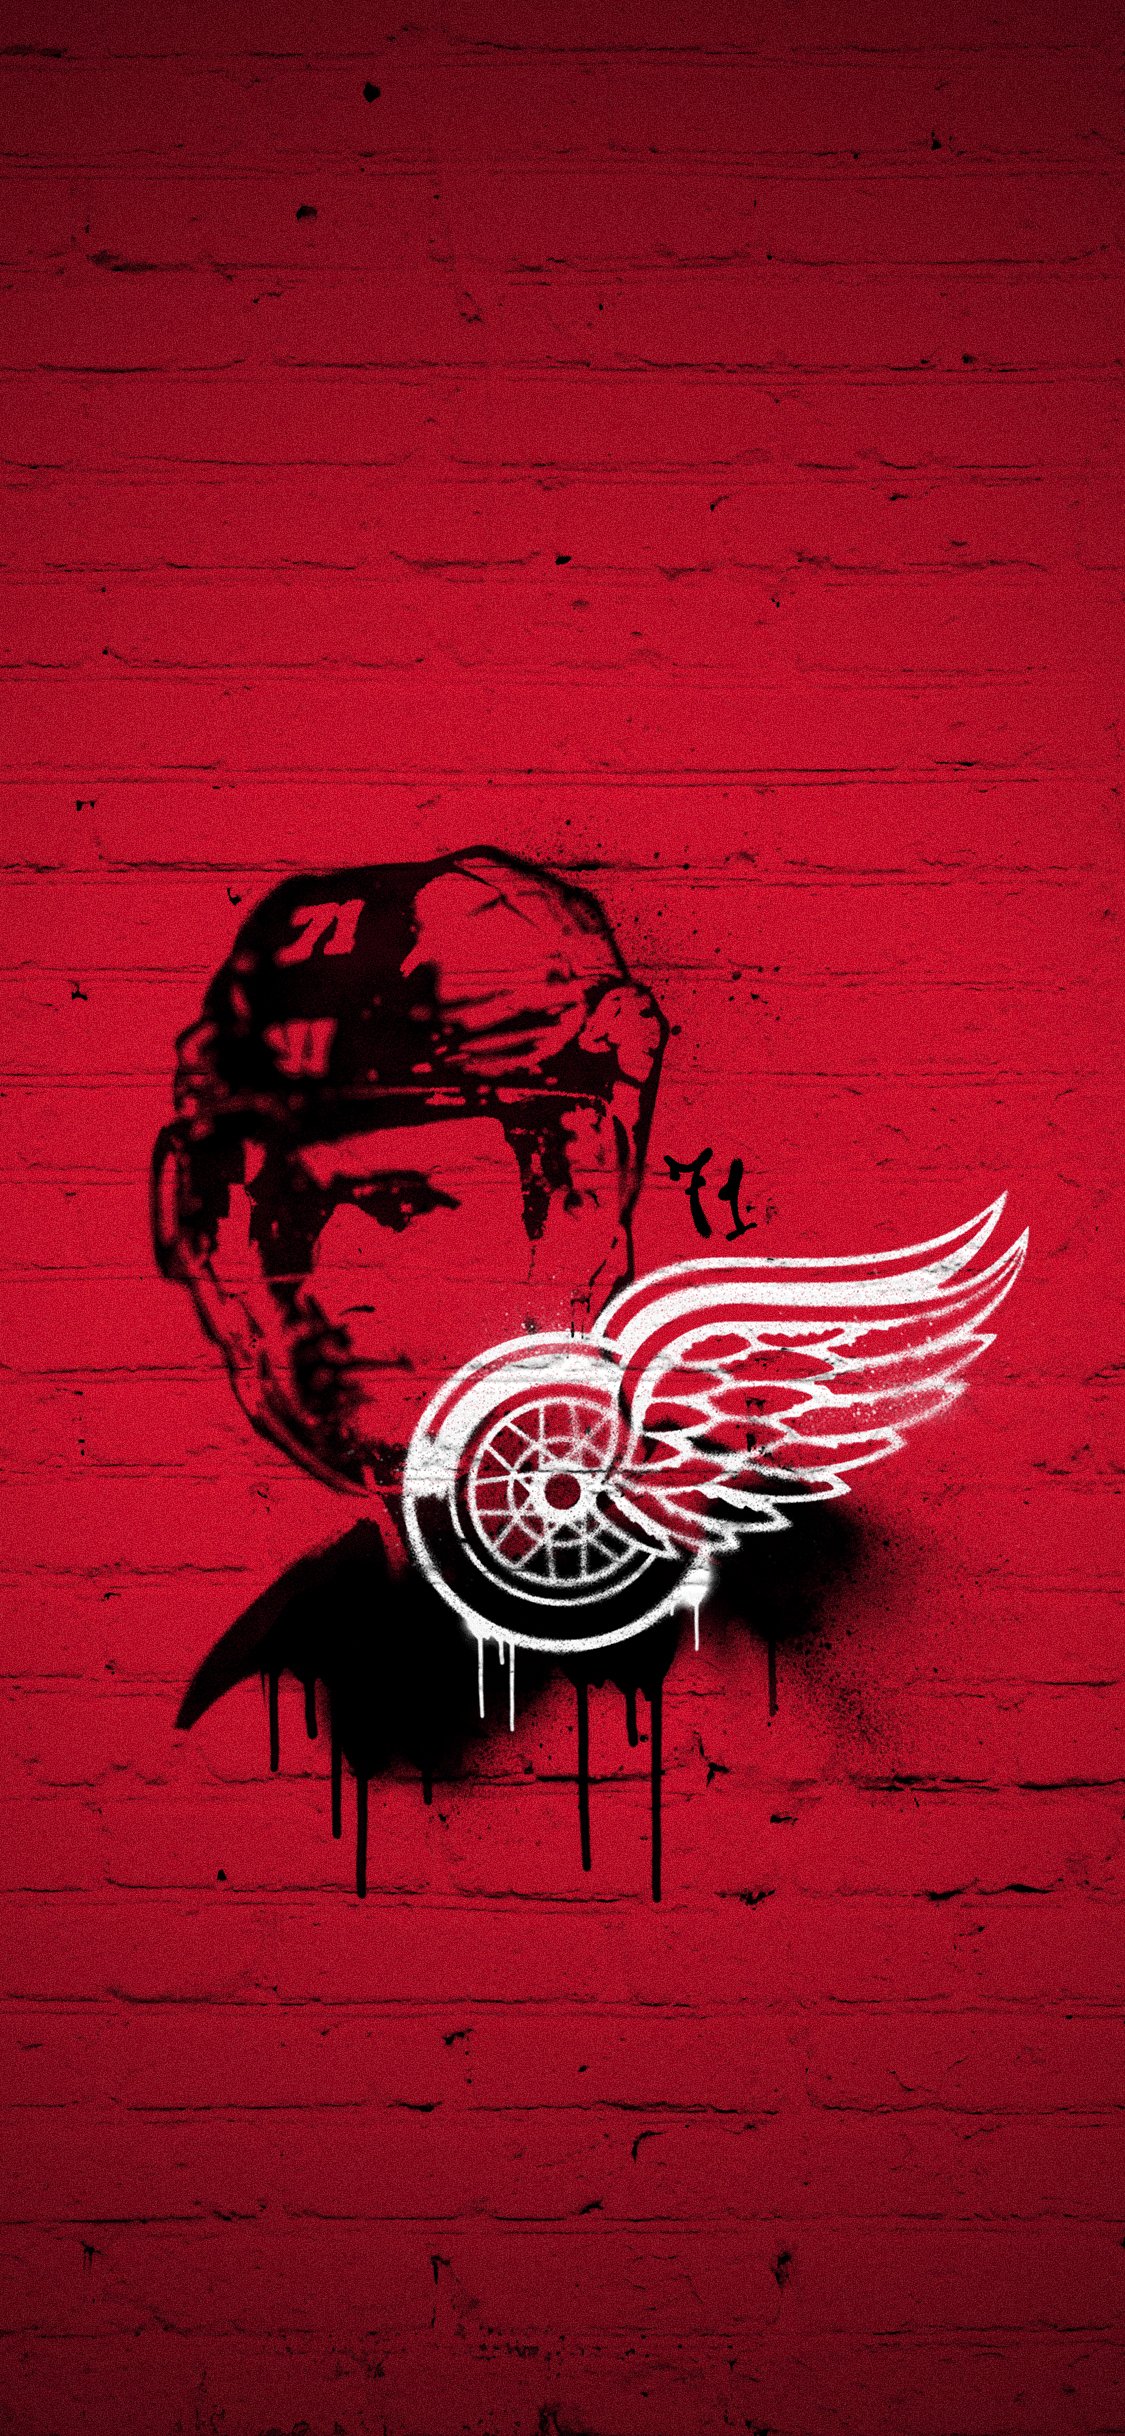 Detroit Red Wings on "🎨🎨🎨 x #LGRW /